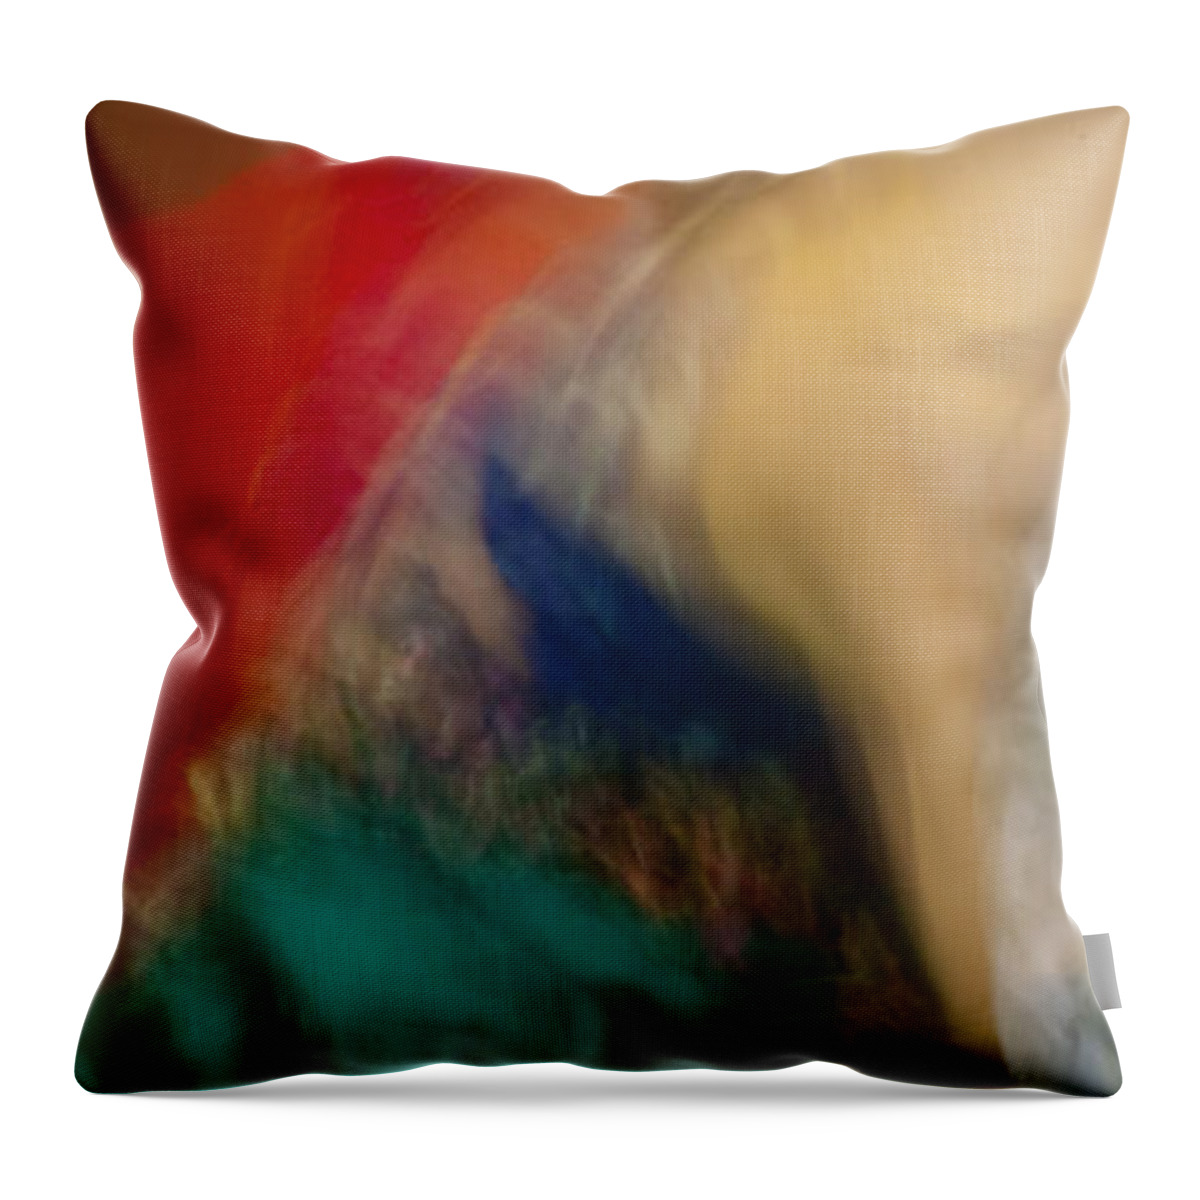 Belly Dancing Throw Pillow featuring the photograph Mideastern Dancing by Catherine Sobredo